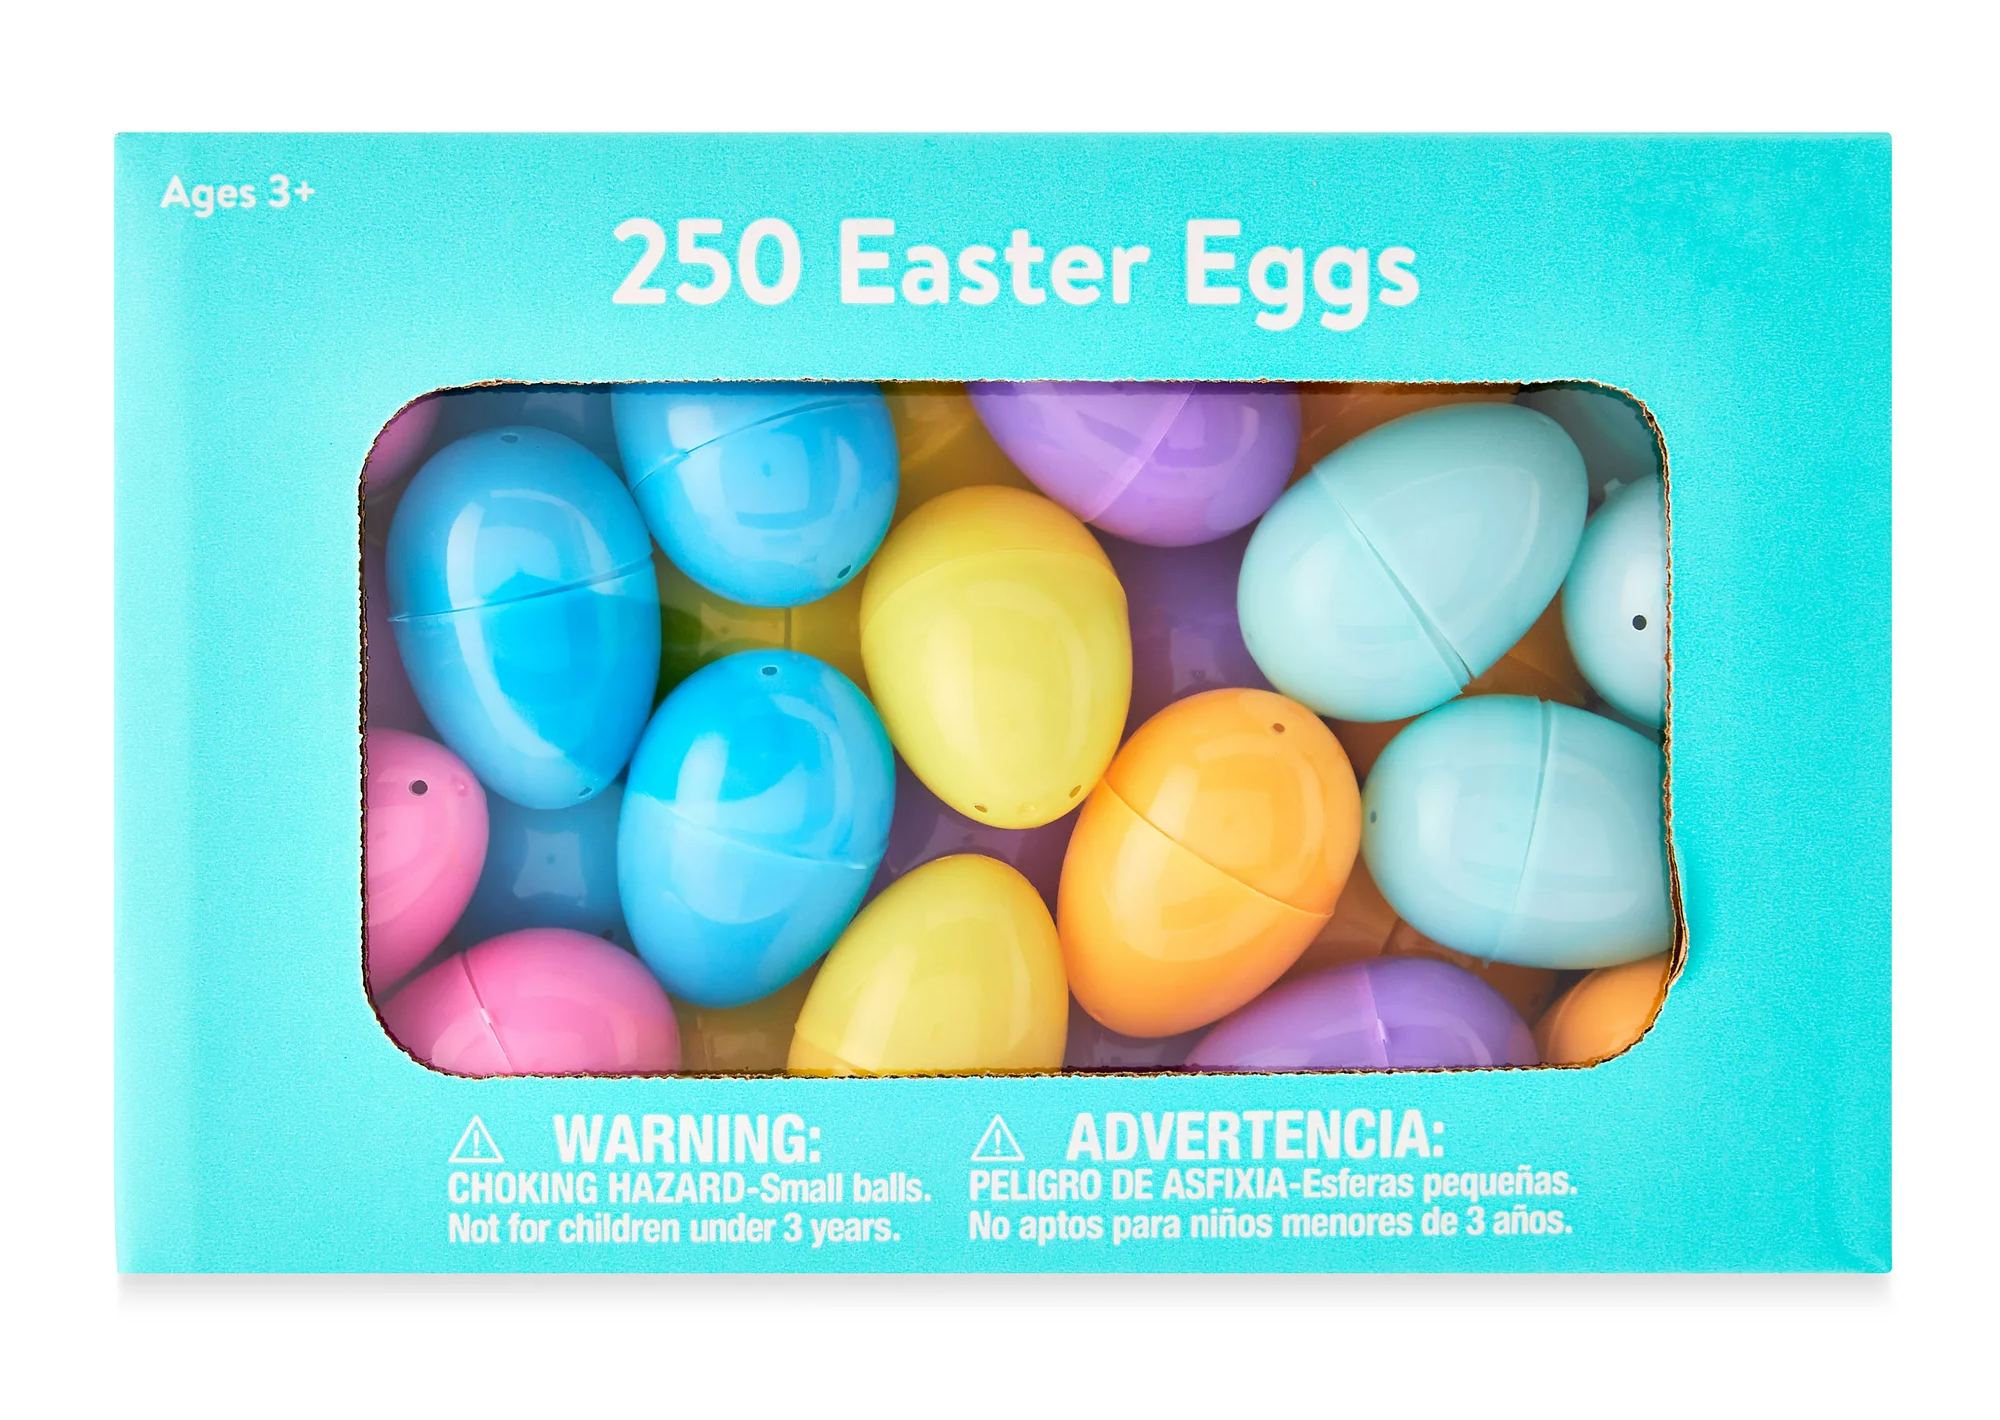 A close up of the eggs in its packaging